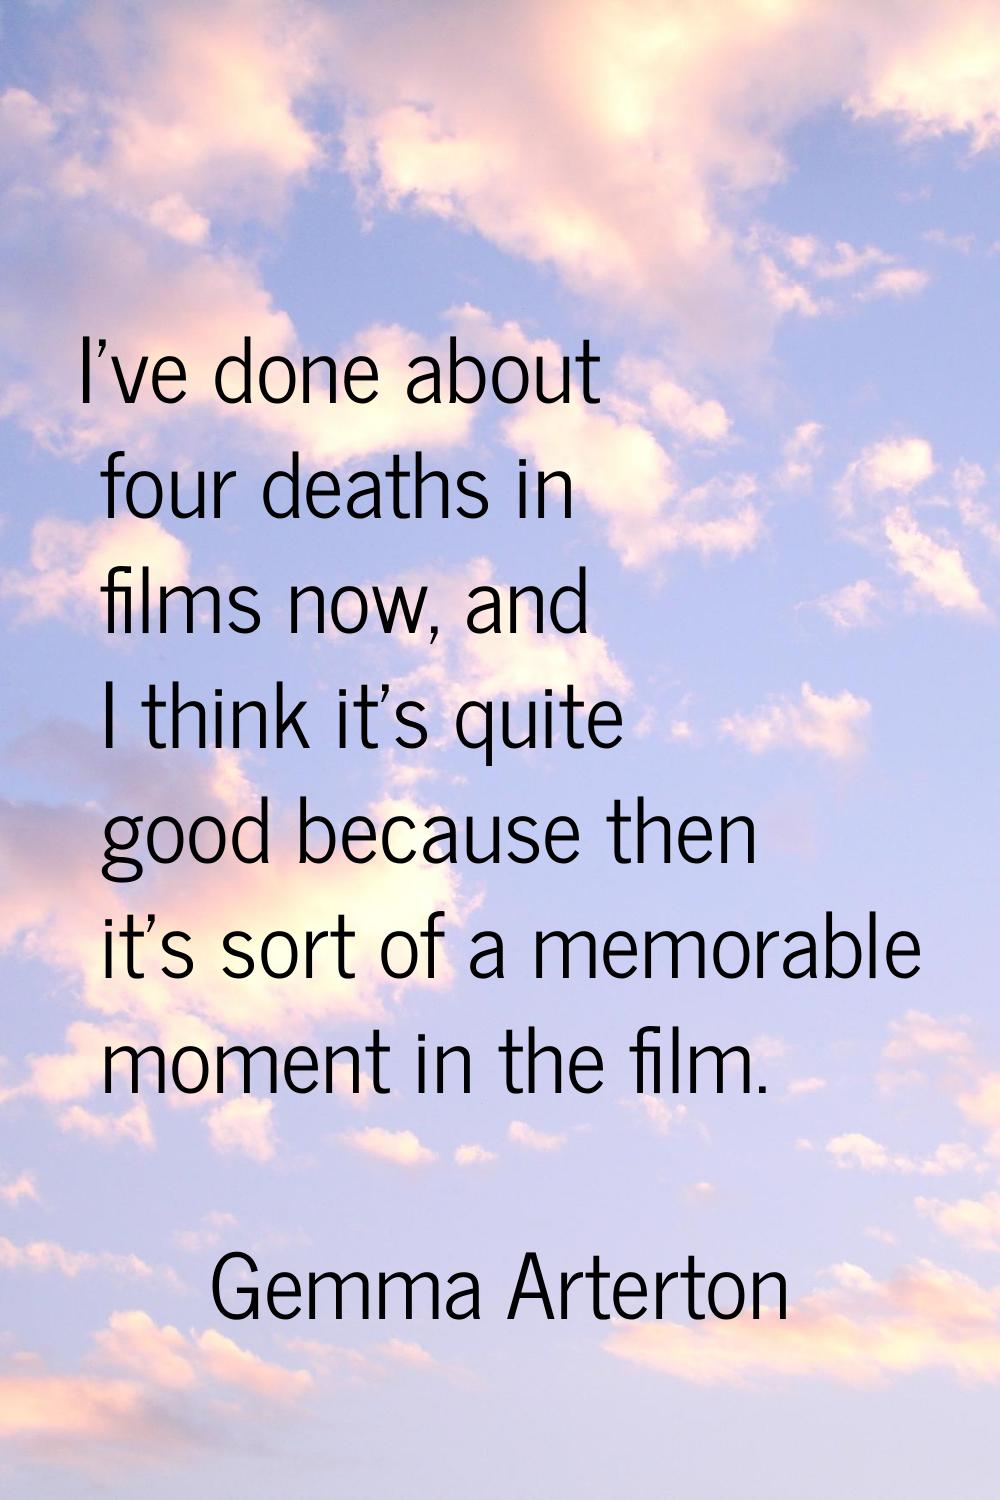 I've done about four deaths in films now, and I think it's quite good because then it's sort of a m